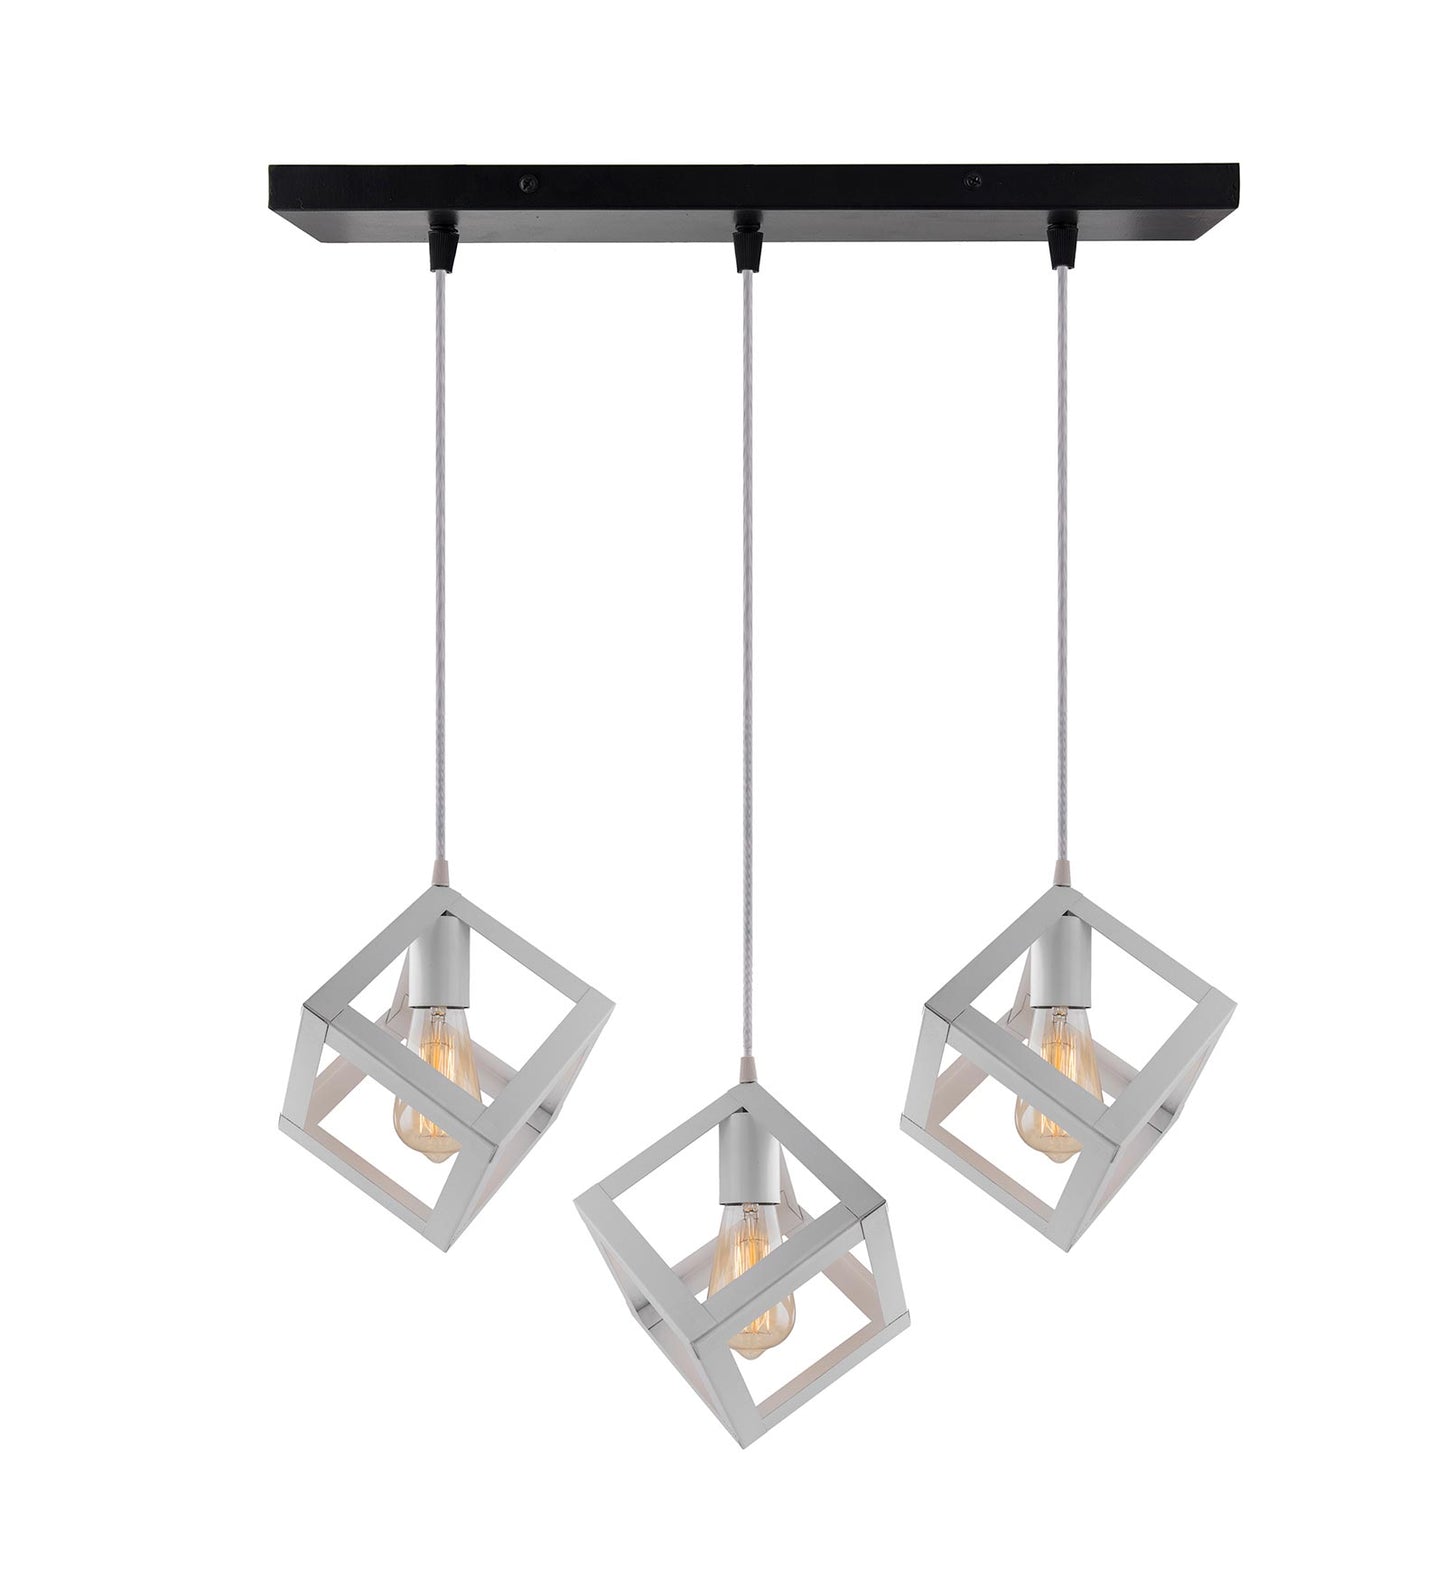 3-lights Linear Cluster Chandelier White Hanging Cube 6" Pendant Light, kitchen area and dining room light, bulb not included